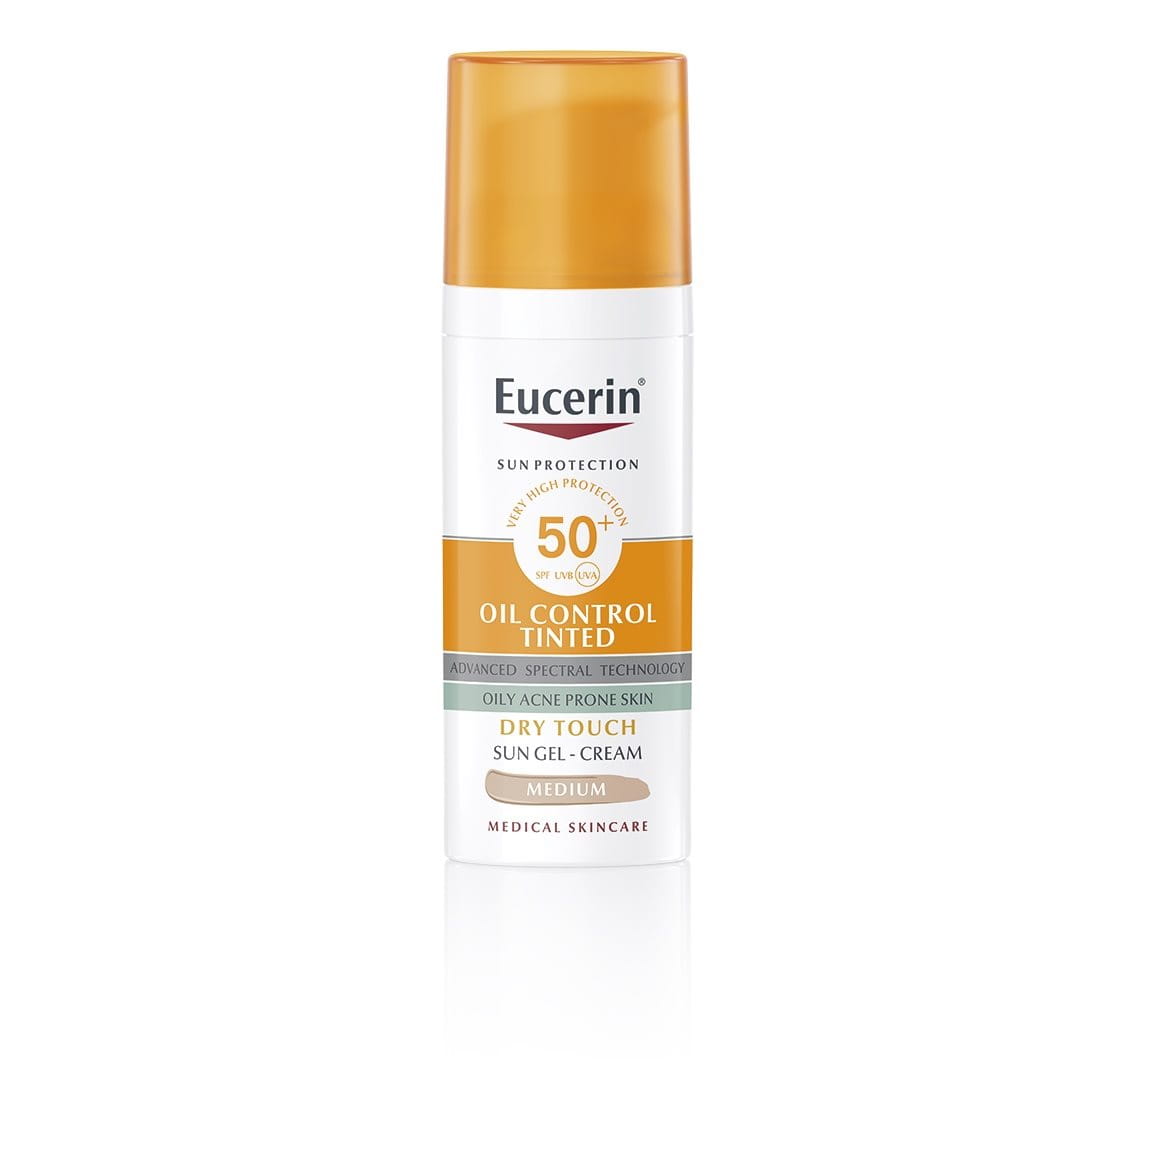 Oil control tinted / sun protection for oily and acne prone skin / with SPF  50+